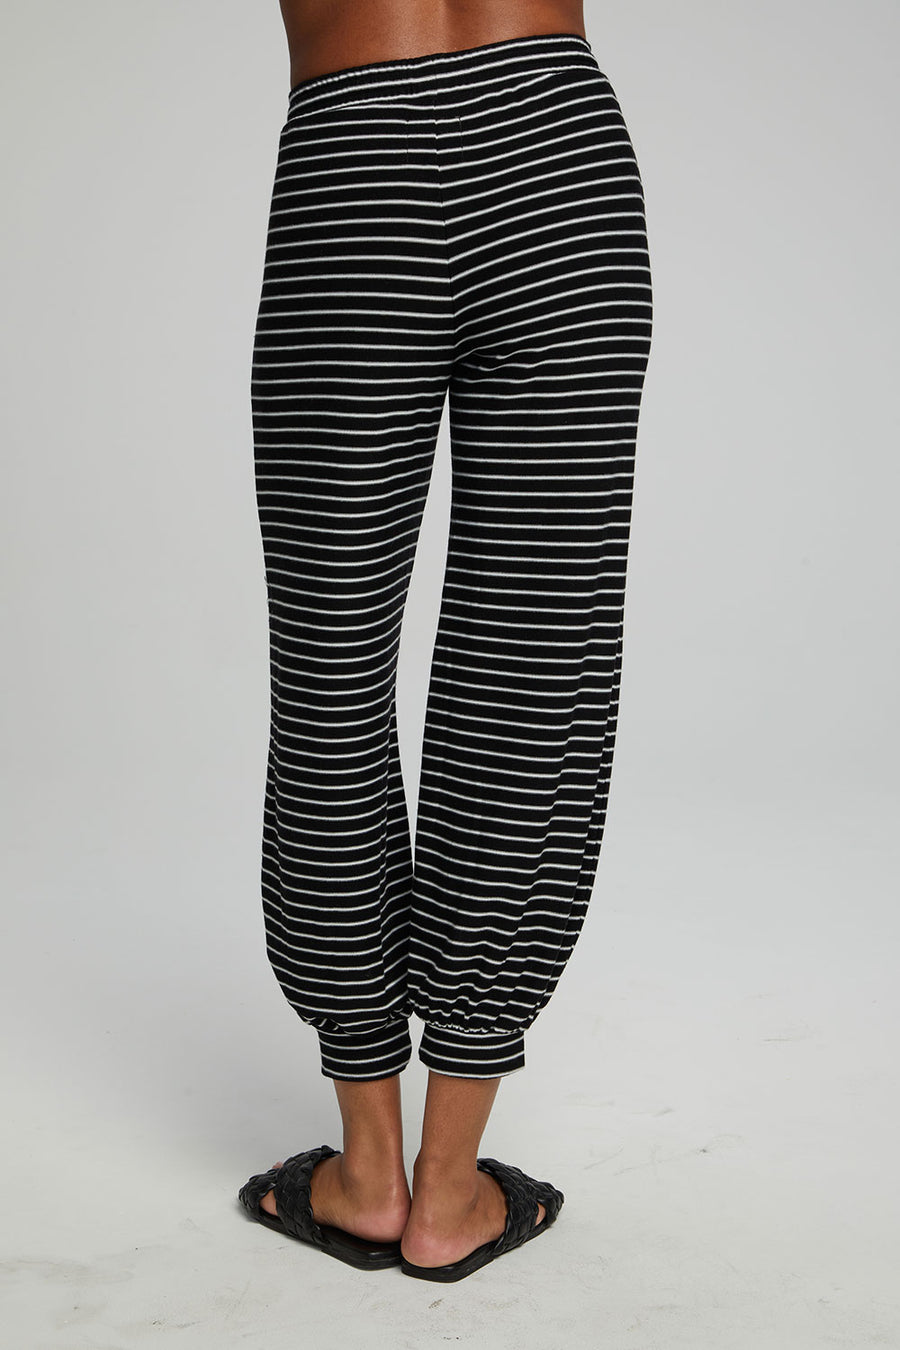 Weekend Joggers - Black and White Stripe WOMENS chaserbrand